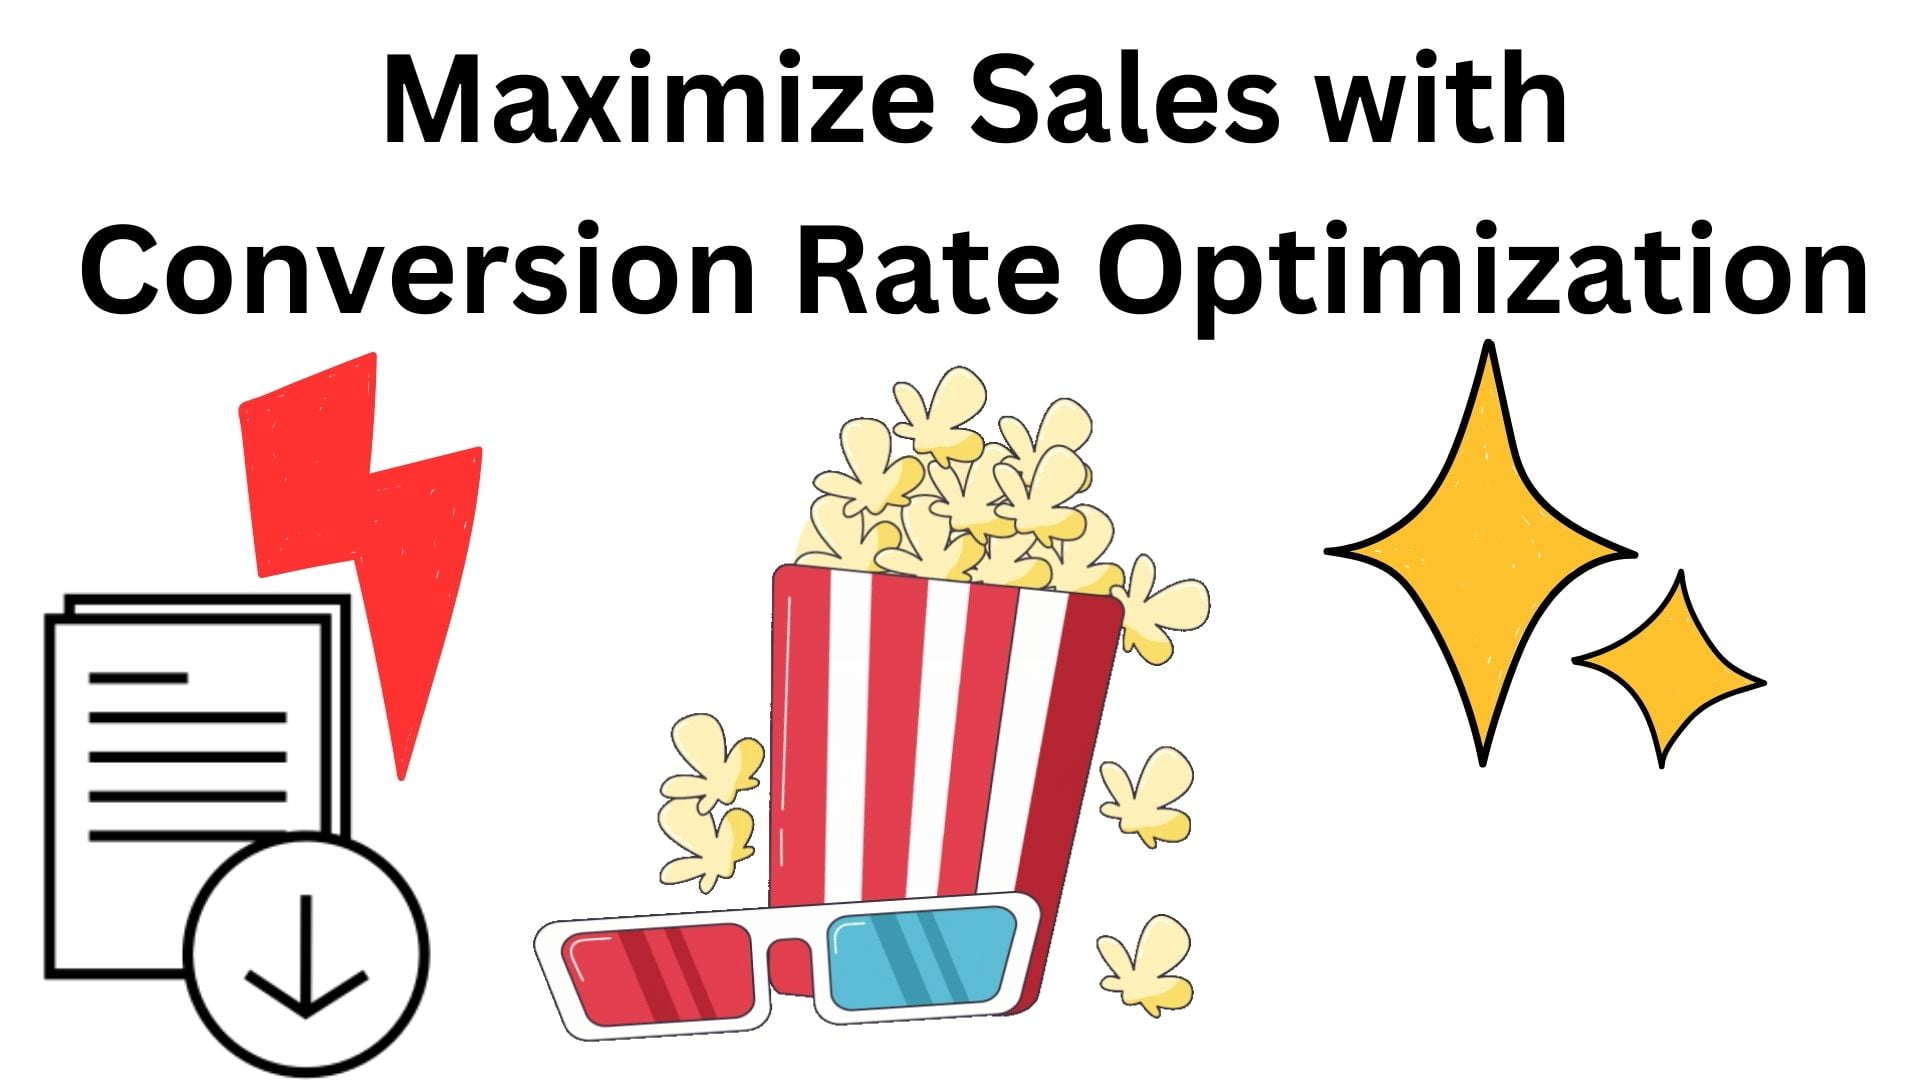 Maximize Sales With Conversion Rate Optimization